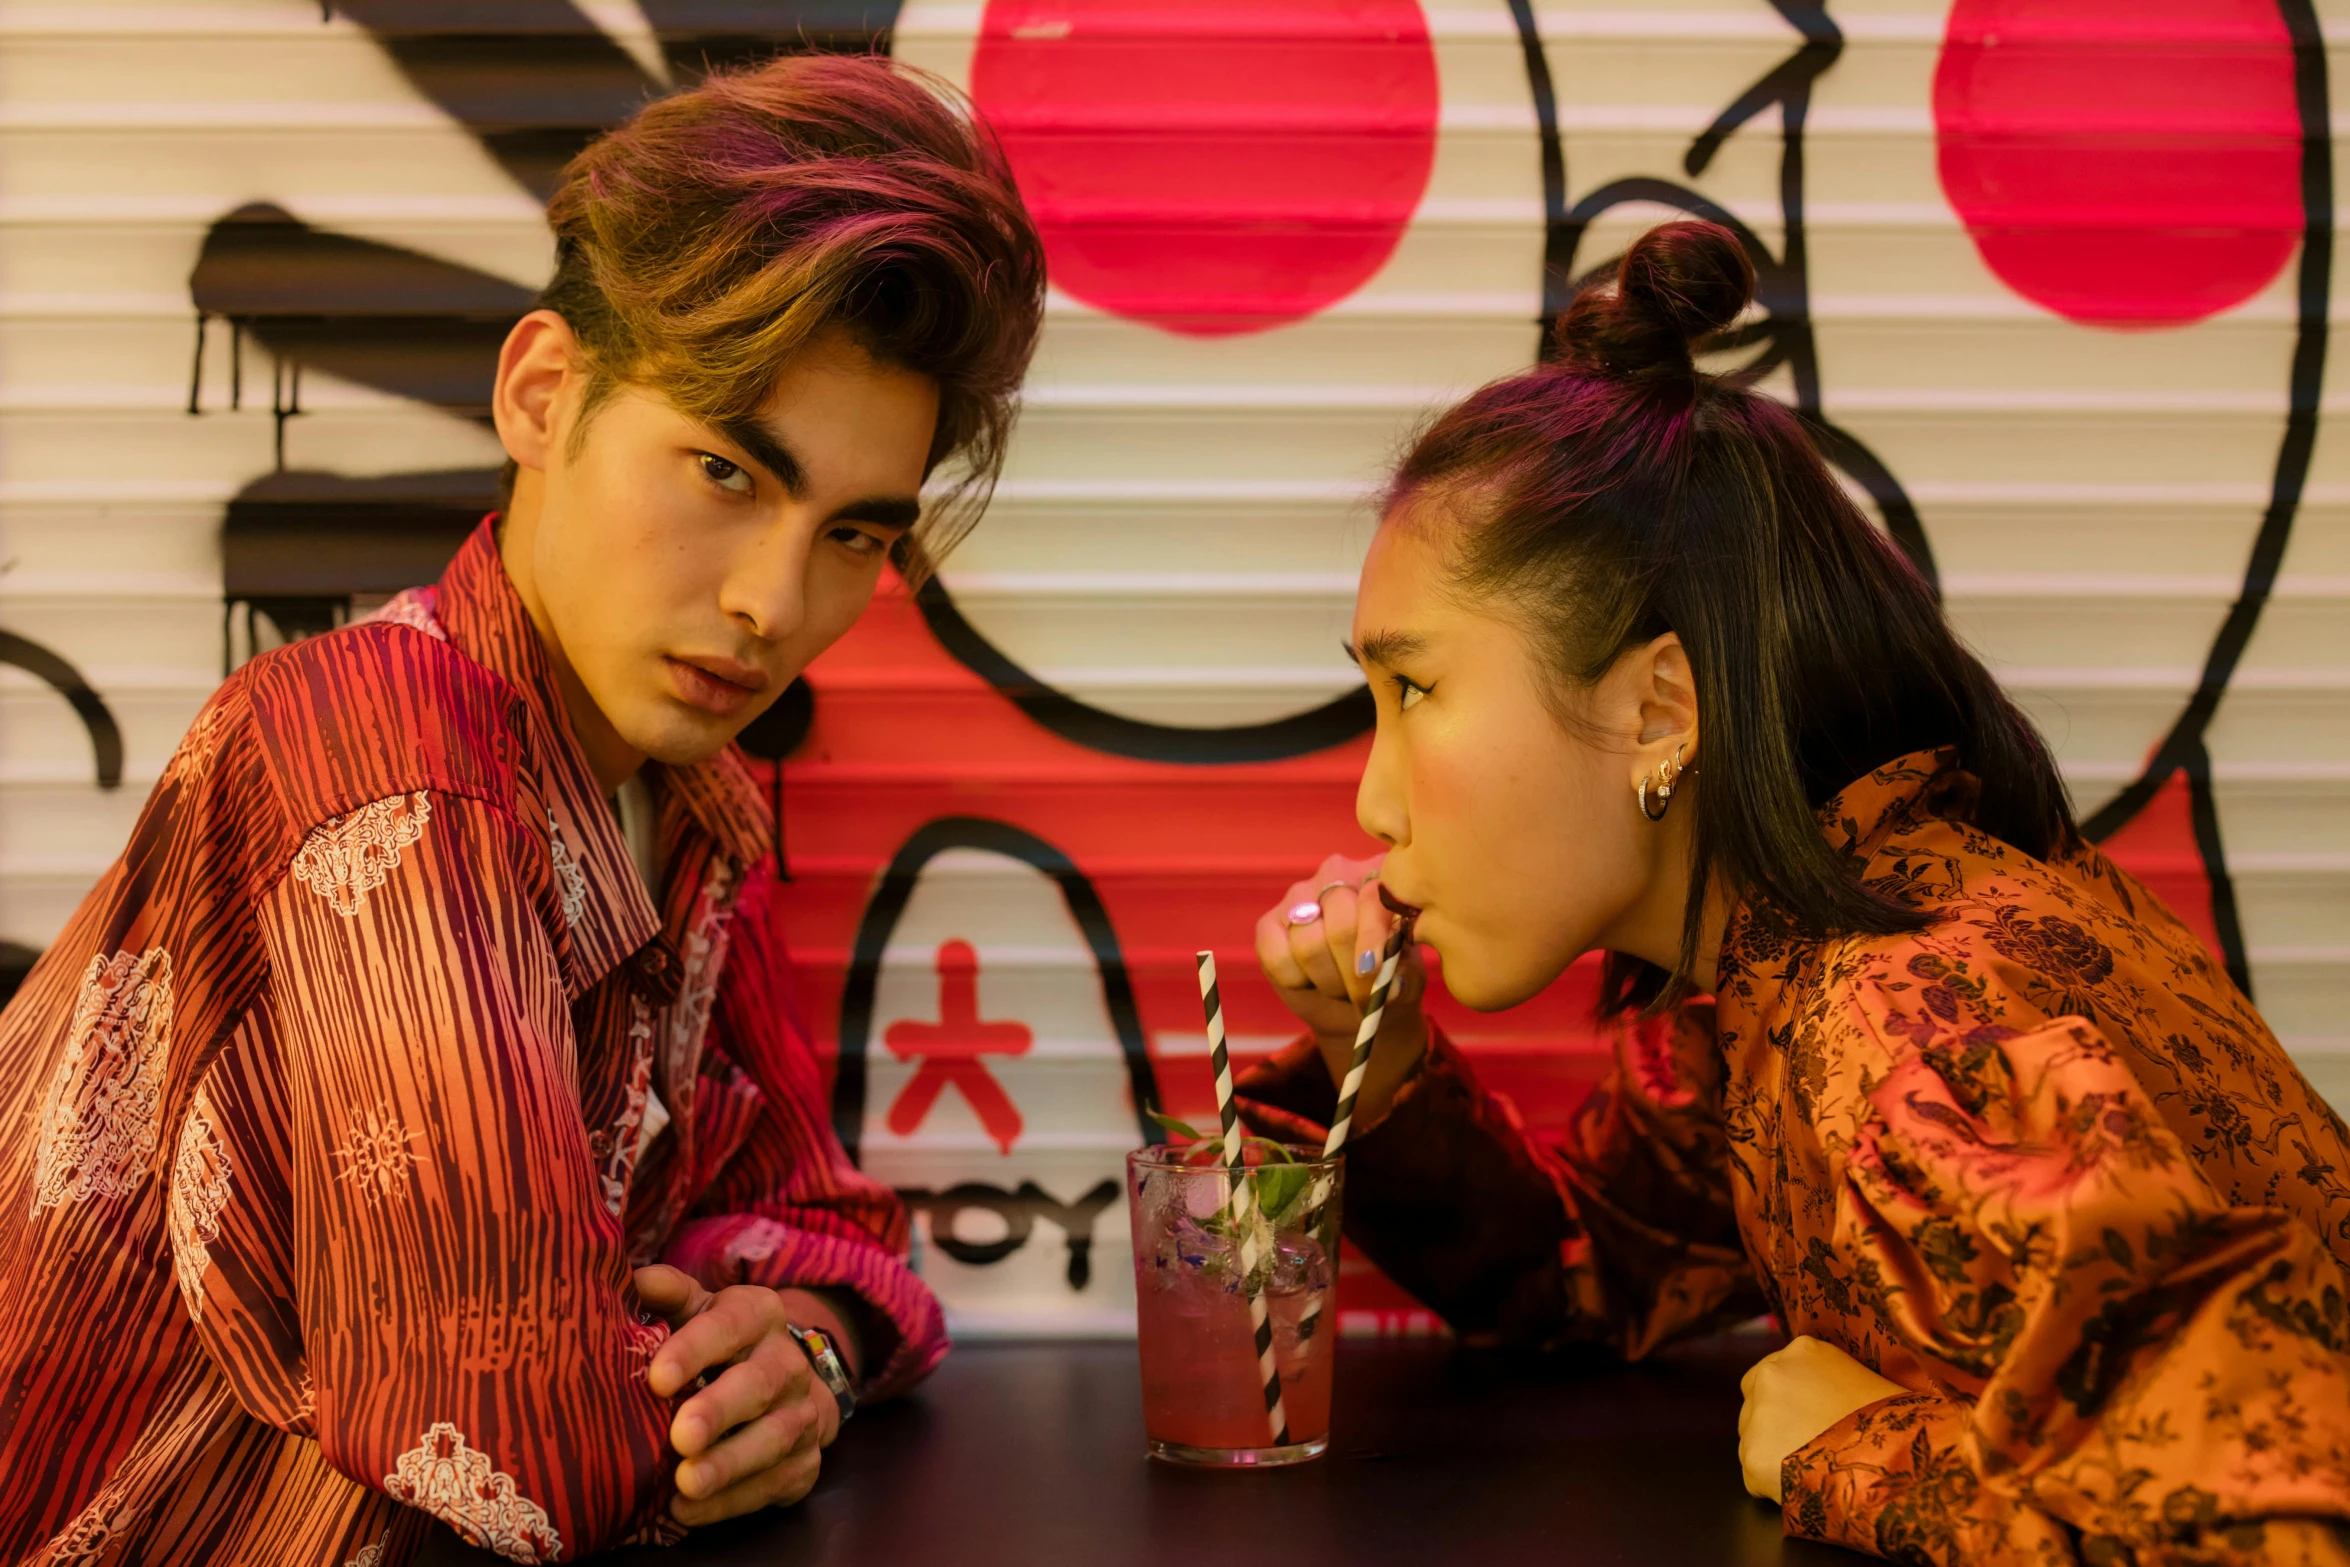 a man and a woman sitting at a table, trending on pexels, toyism, kpop star, looking to his side, ukiyo, asia